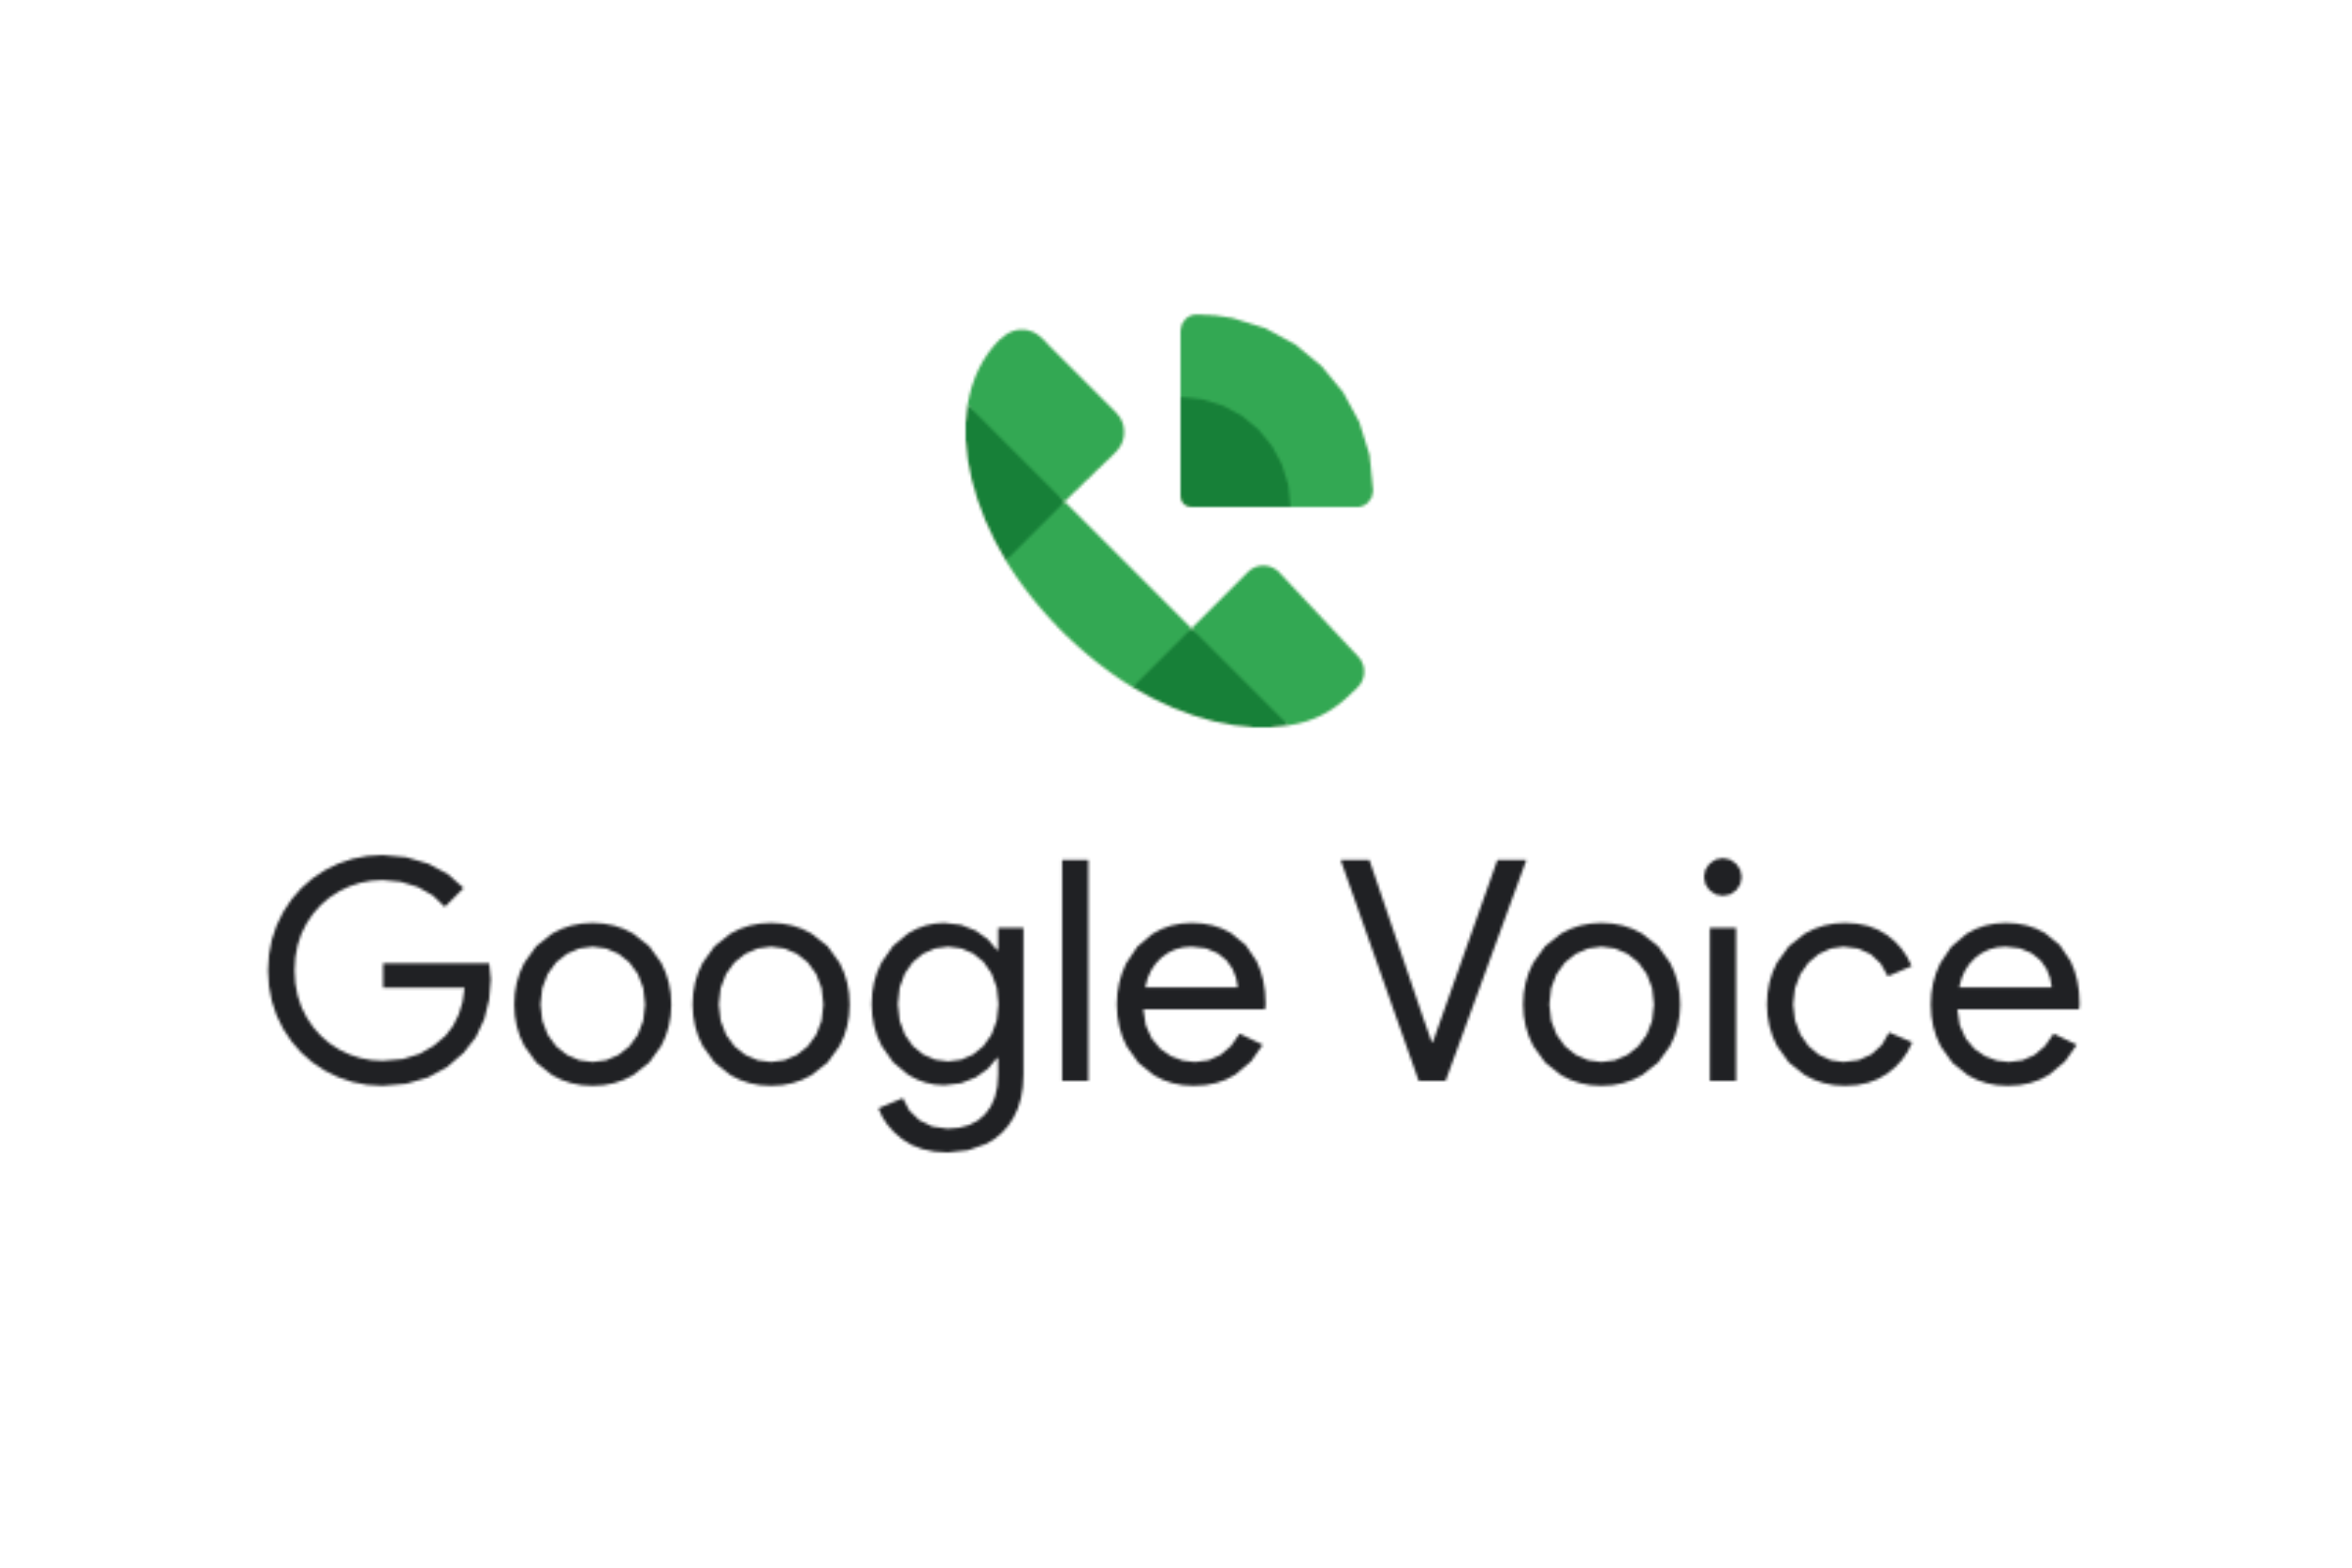 Google Voice removes Smart Reply support on Android